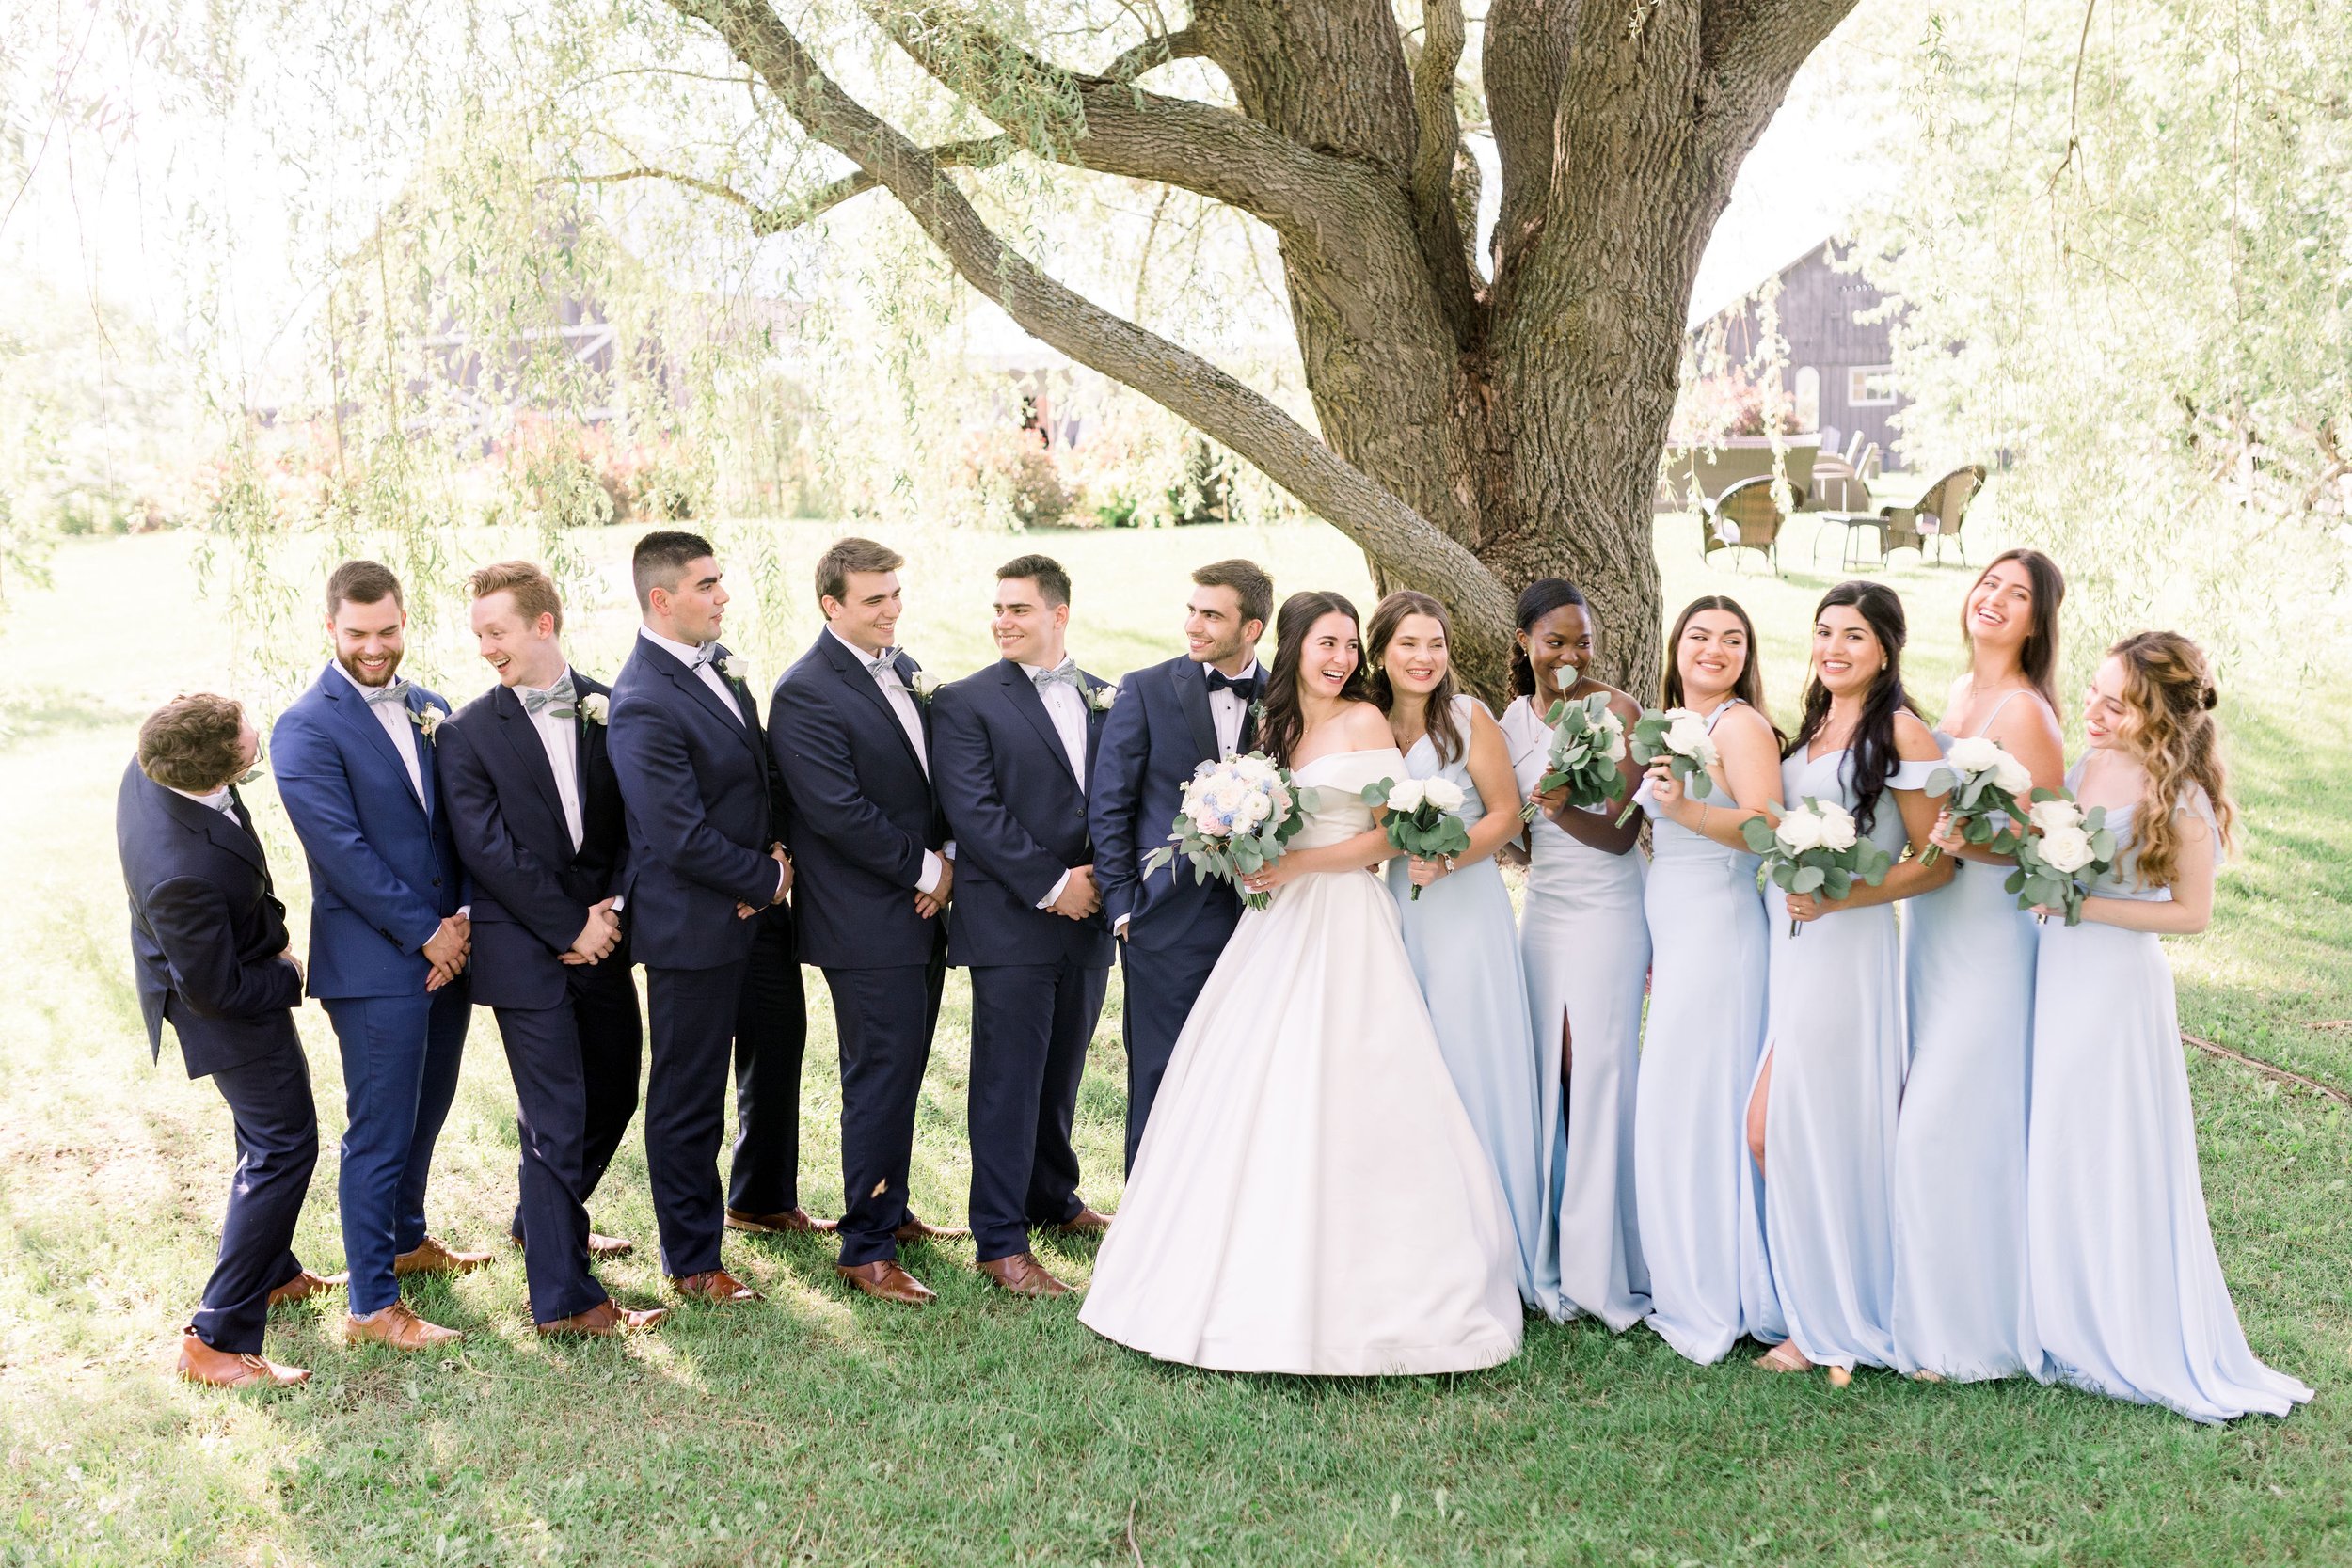  Bride and groom laugh with their groomsmen and bridesmaids by Chelsea Mason Photography. Almonte wedding photographers bridal party #Chelseamasonphotography #Chelseamasonweddings #Onatarioweddings #EvermoreweddingsAlmonte #Ontarioweddingphotographer